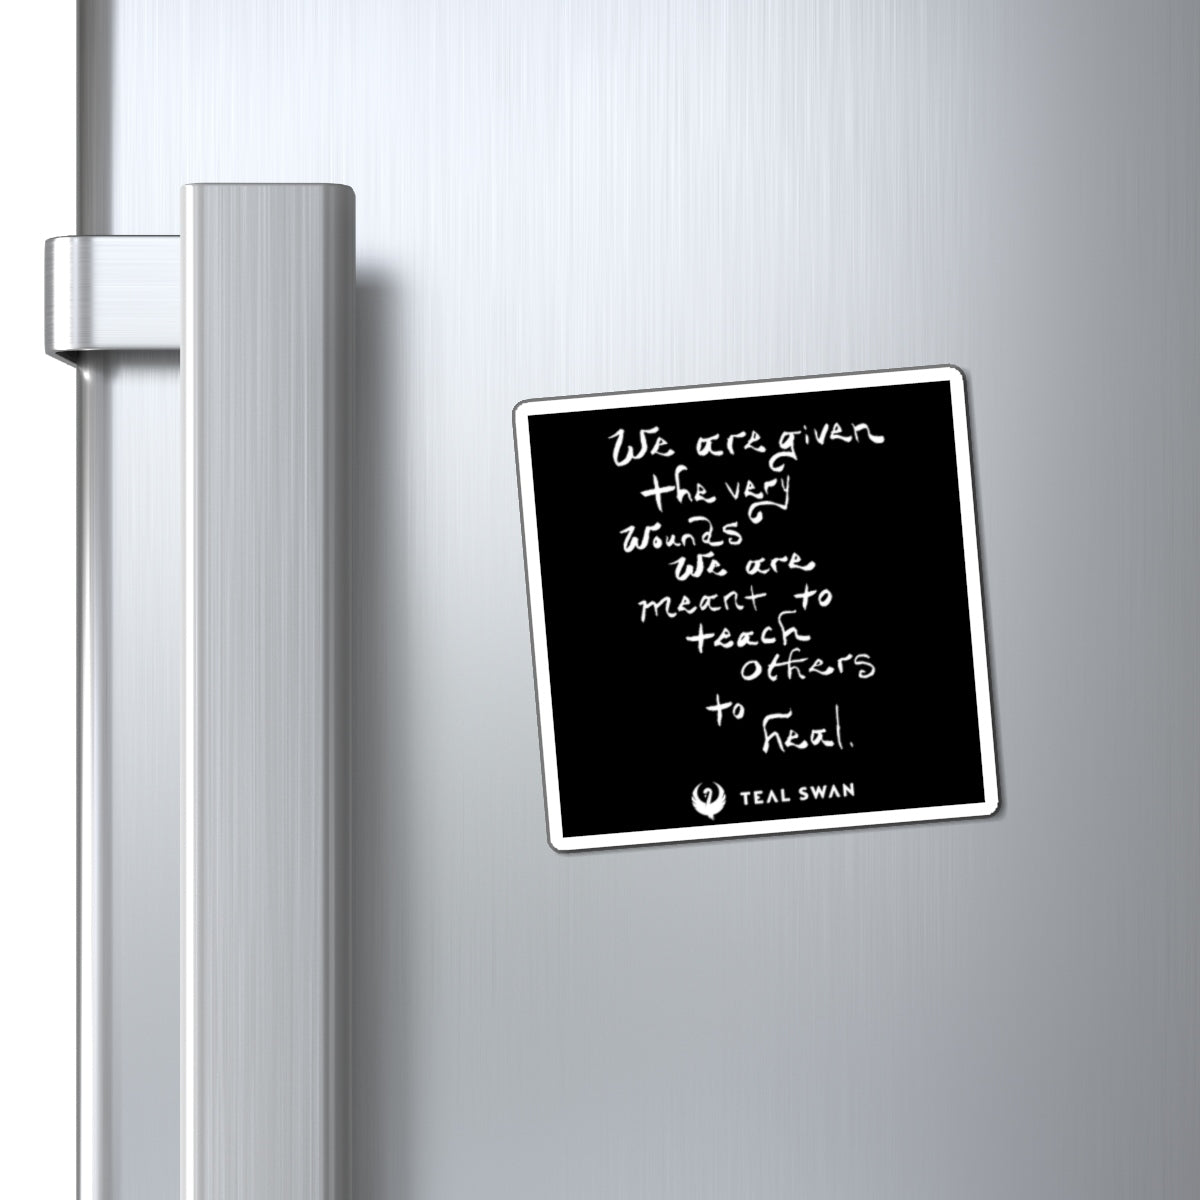 make-your-dreams-come-true-to-wear-the-very-wounds-quote-magnets-sale_1.jpg